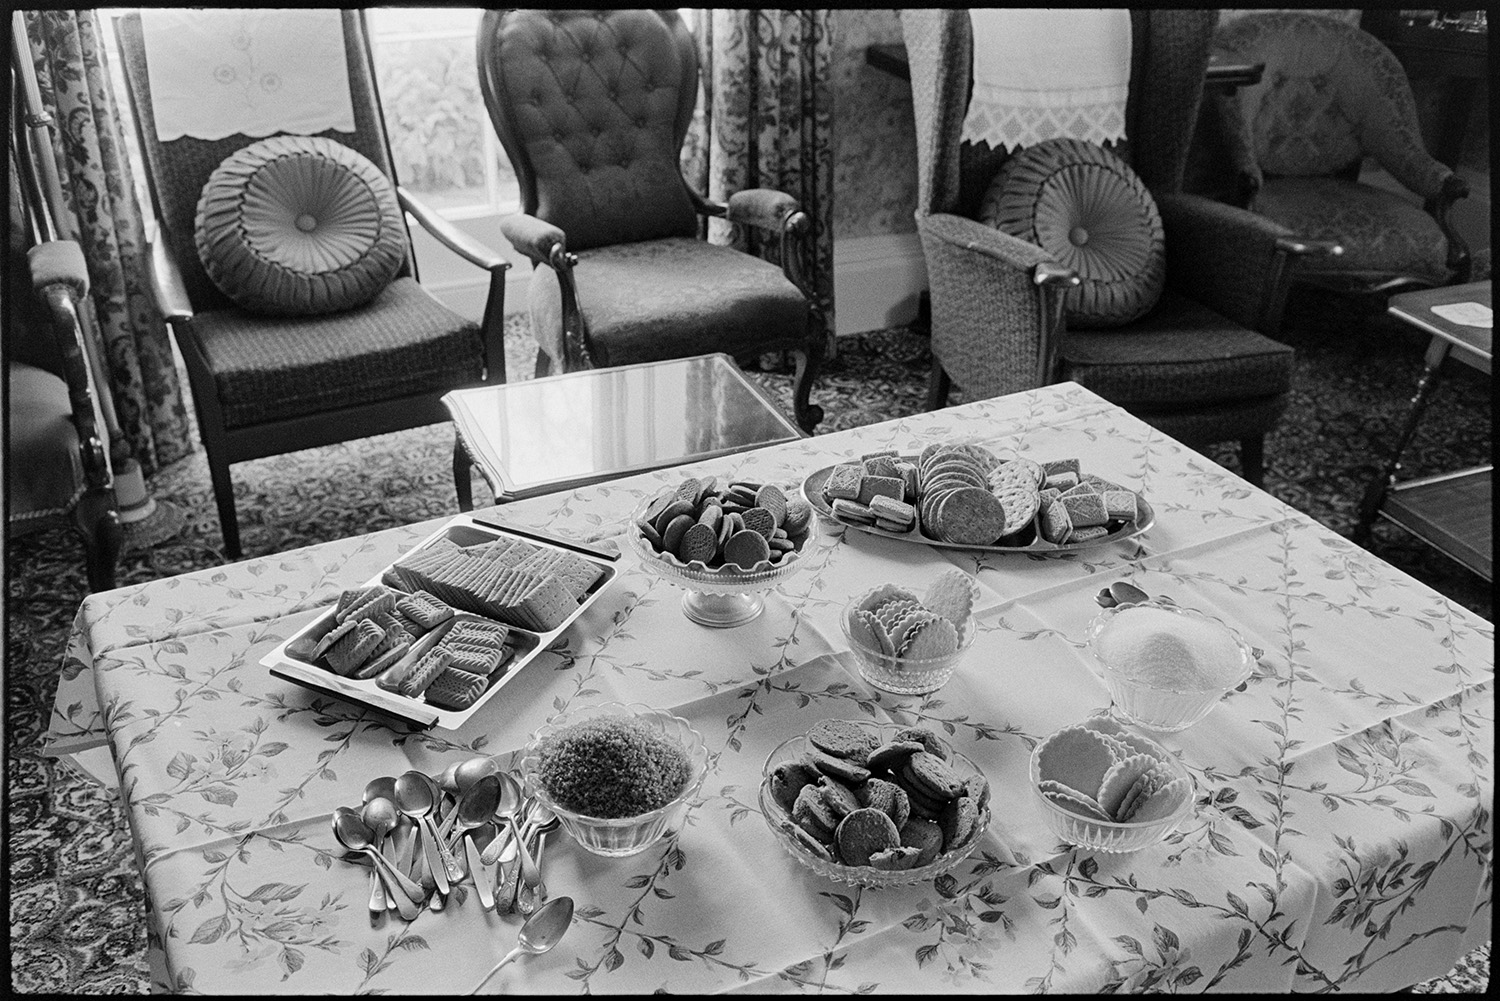 Biscuits laid out for tea at garden fete on table inside.
[Plates of biscuits laid out on a table in a room with armchairs at a fete at the Old Rectory, Merton.]